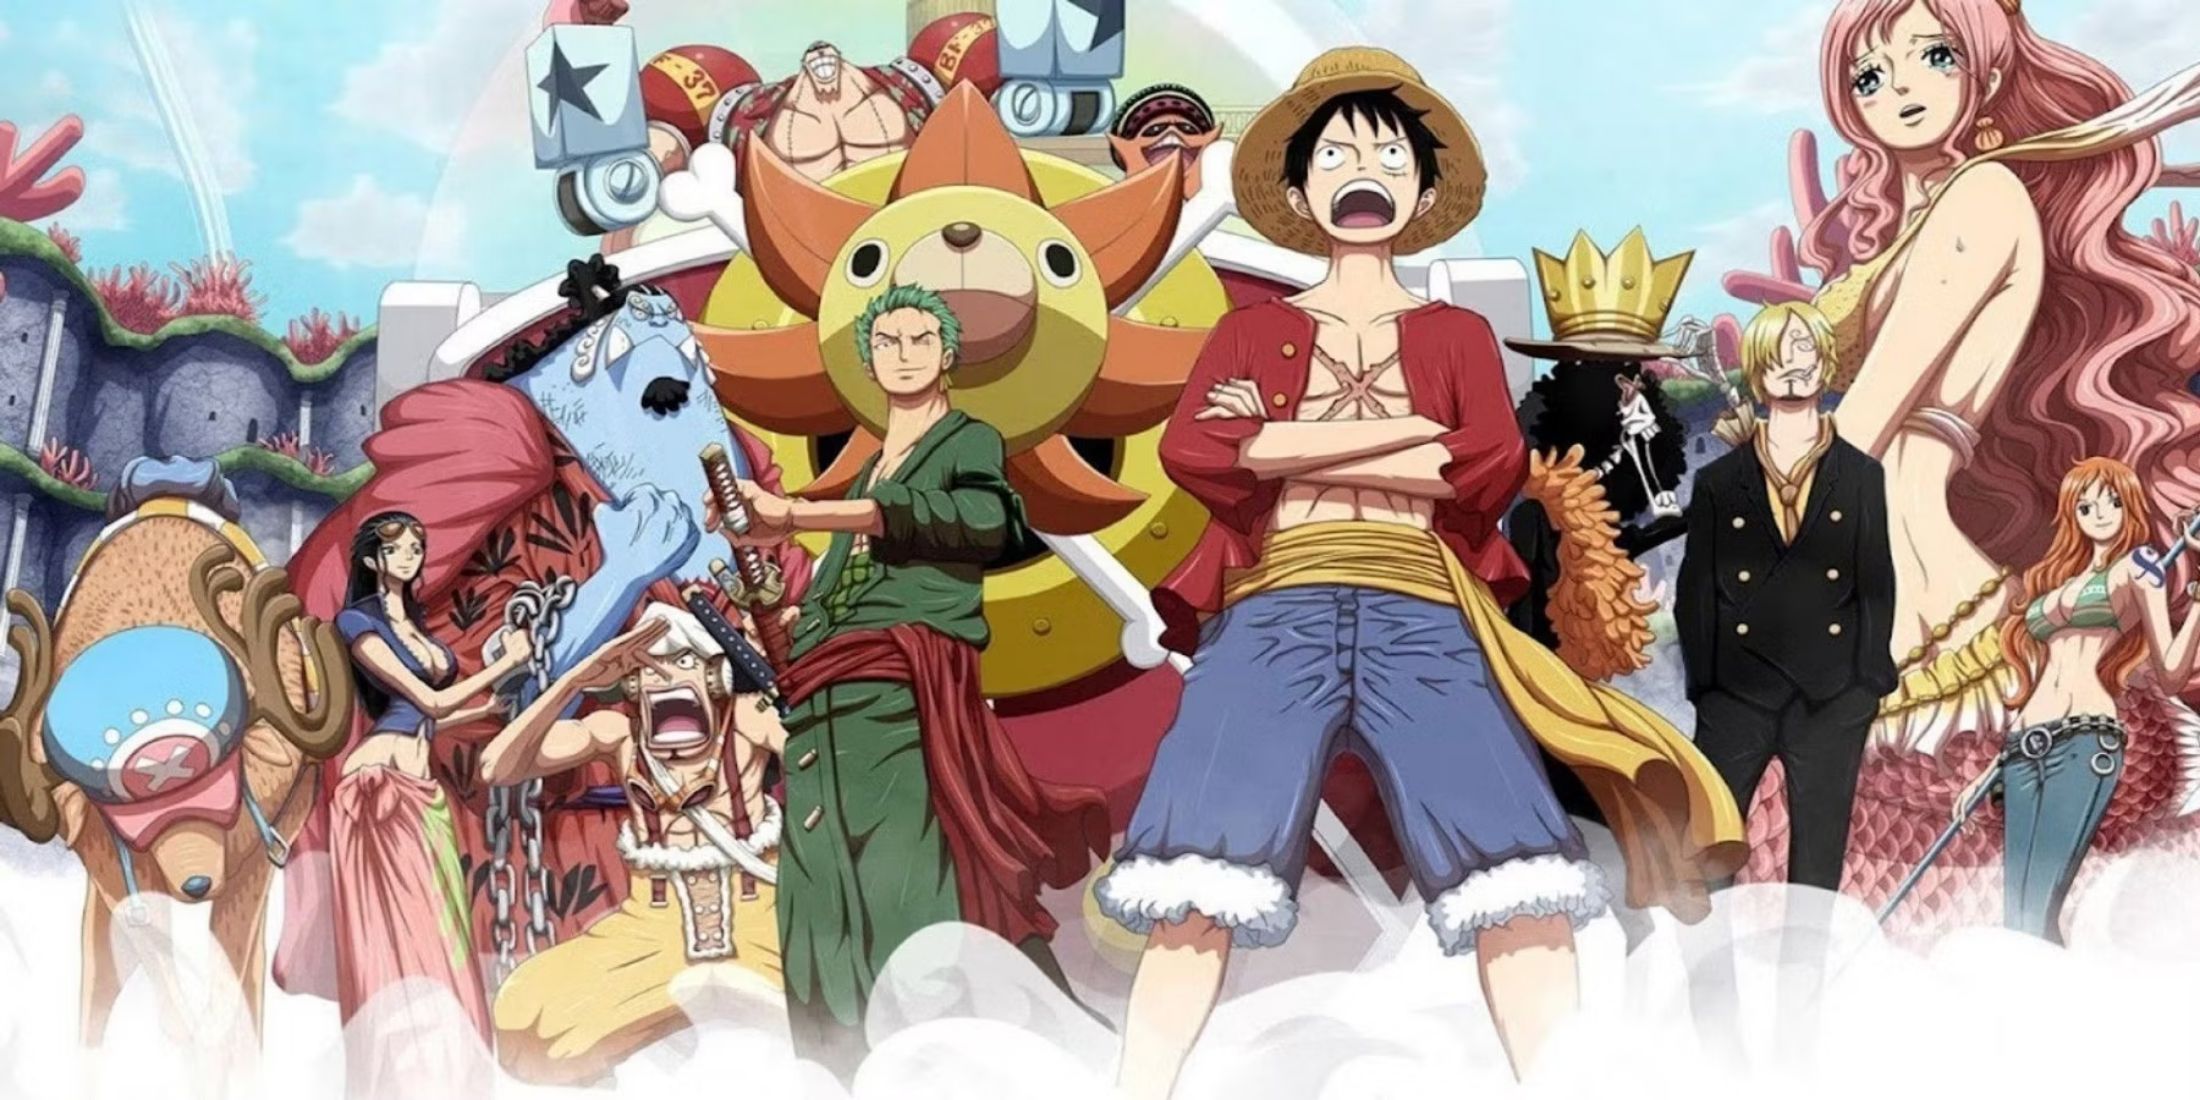 An array of characters from One Piece, with Luffy at the front